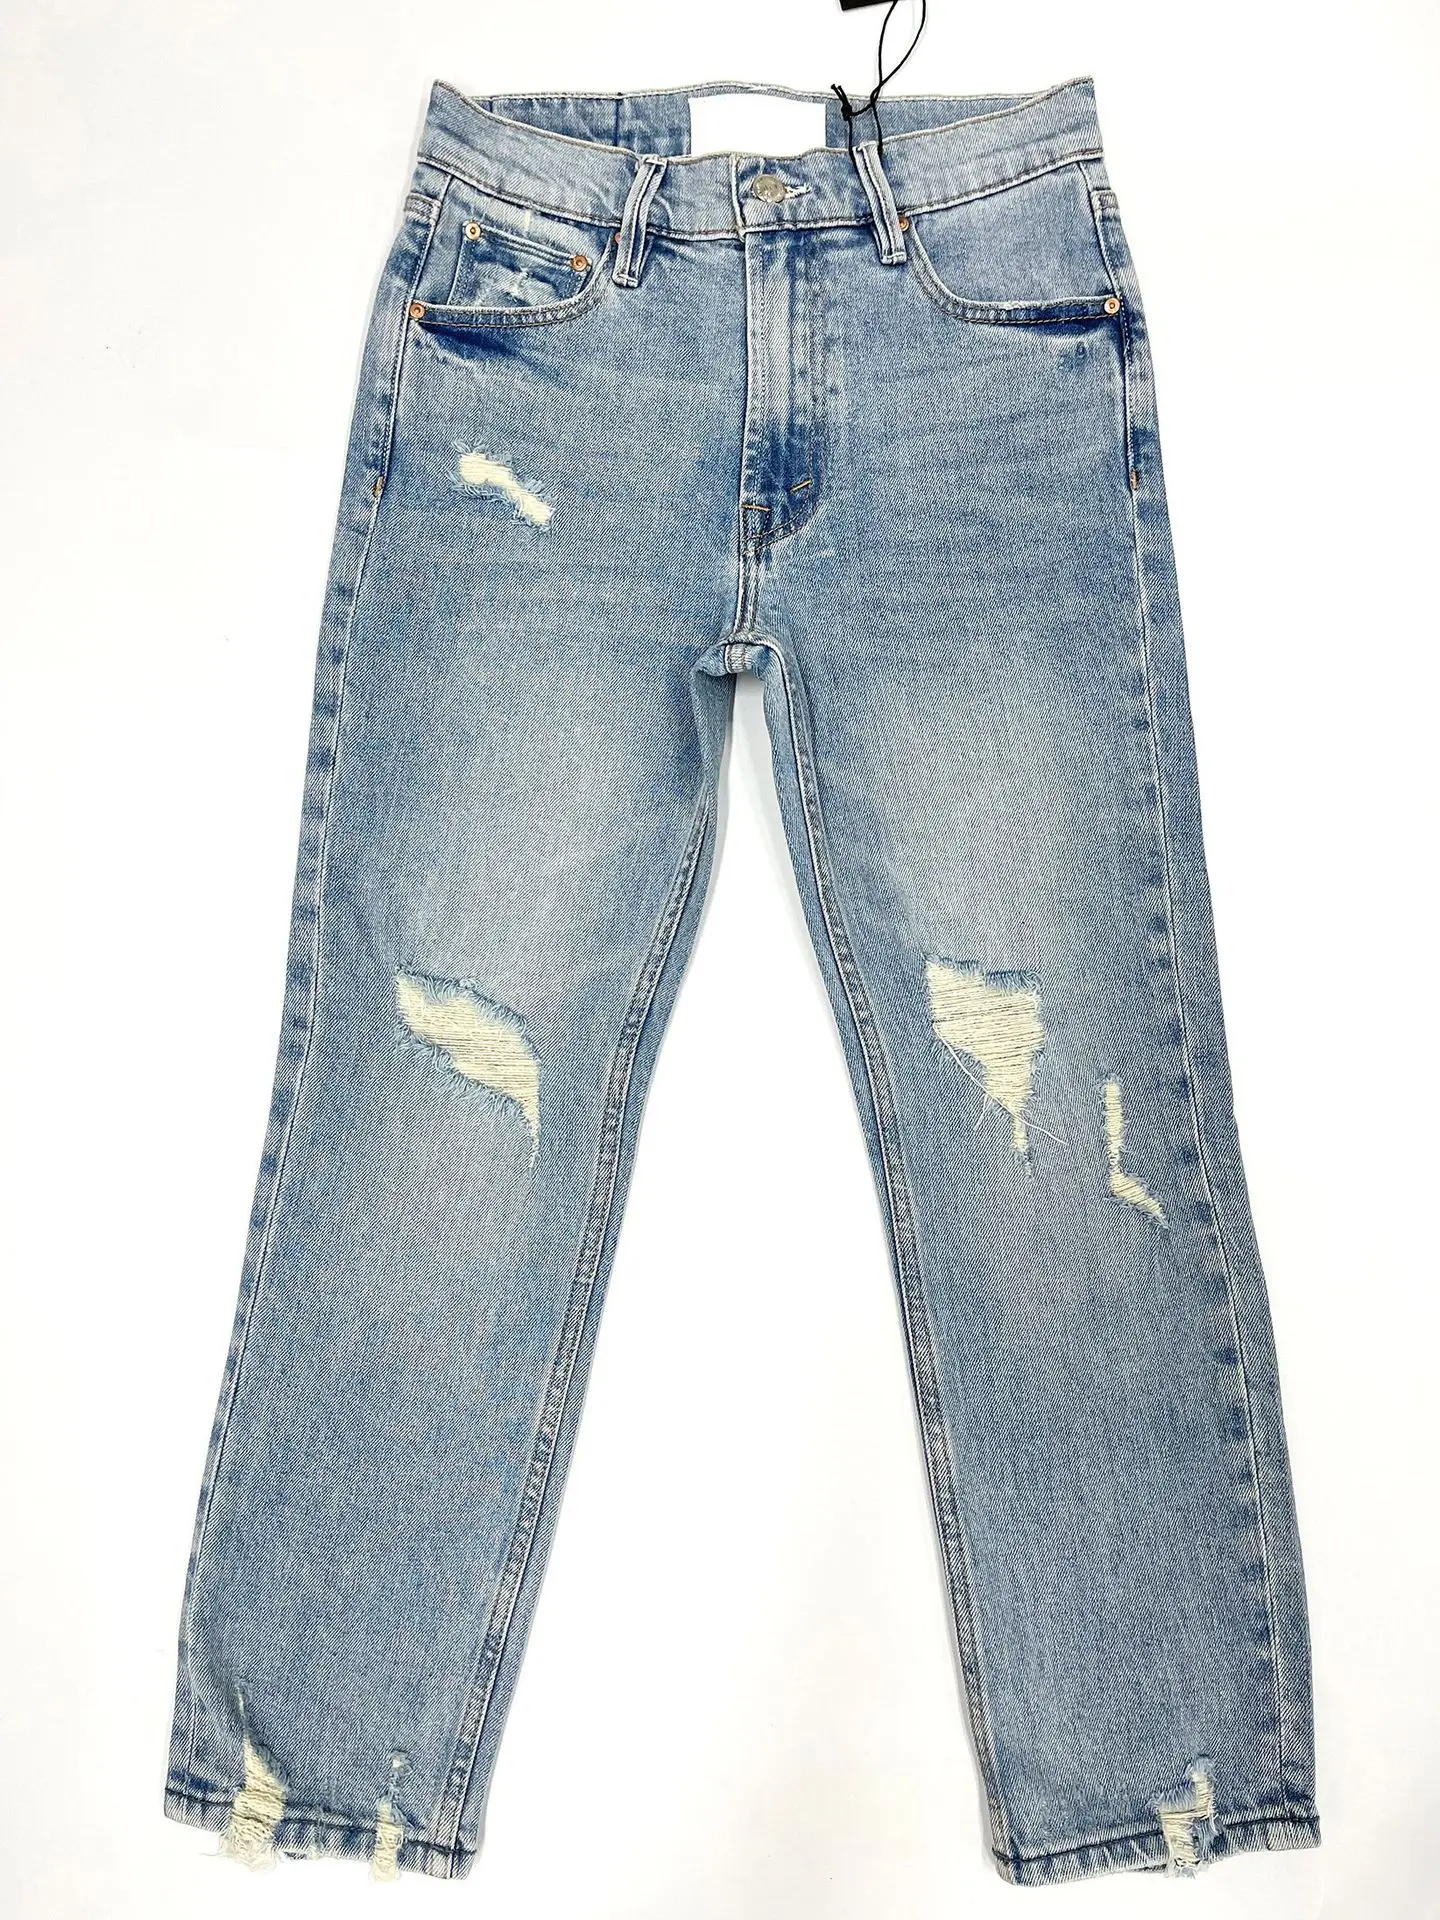 Women's High Waist Distressed Retro Jeans casual fashion ankle-length denim pants 2023 new images - 6